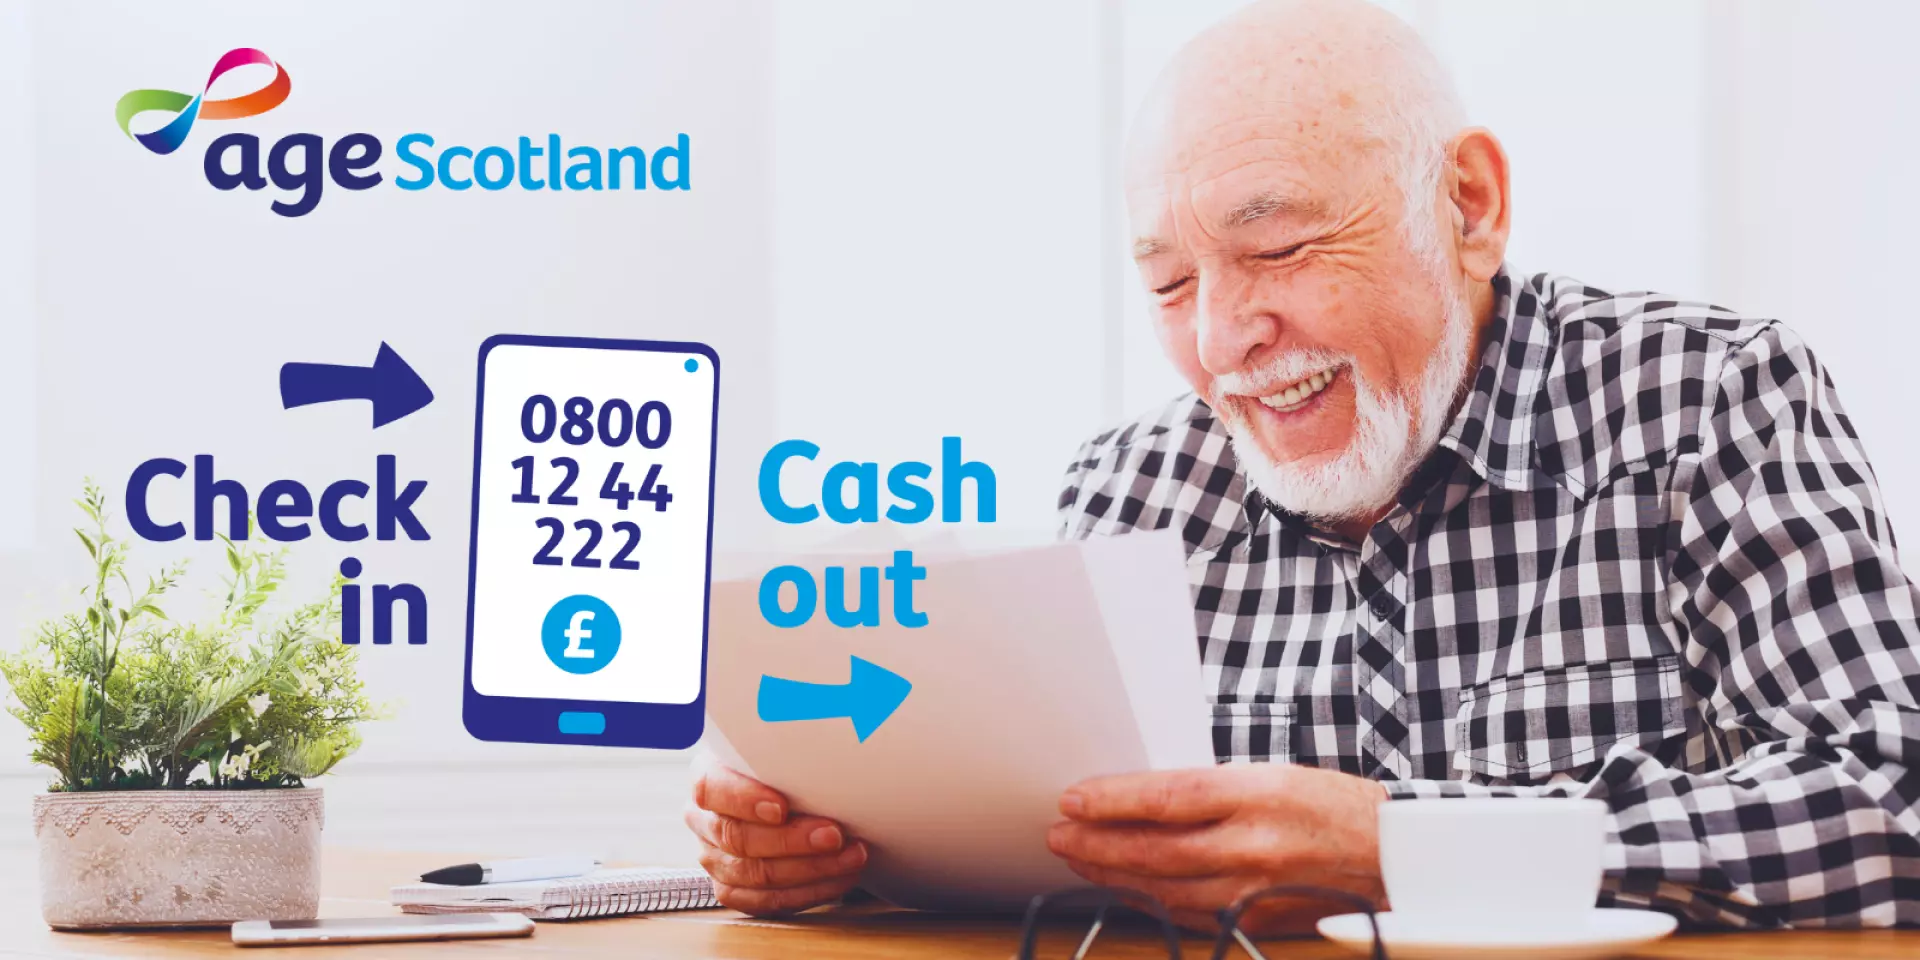 Check in cash out - older man with graphic